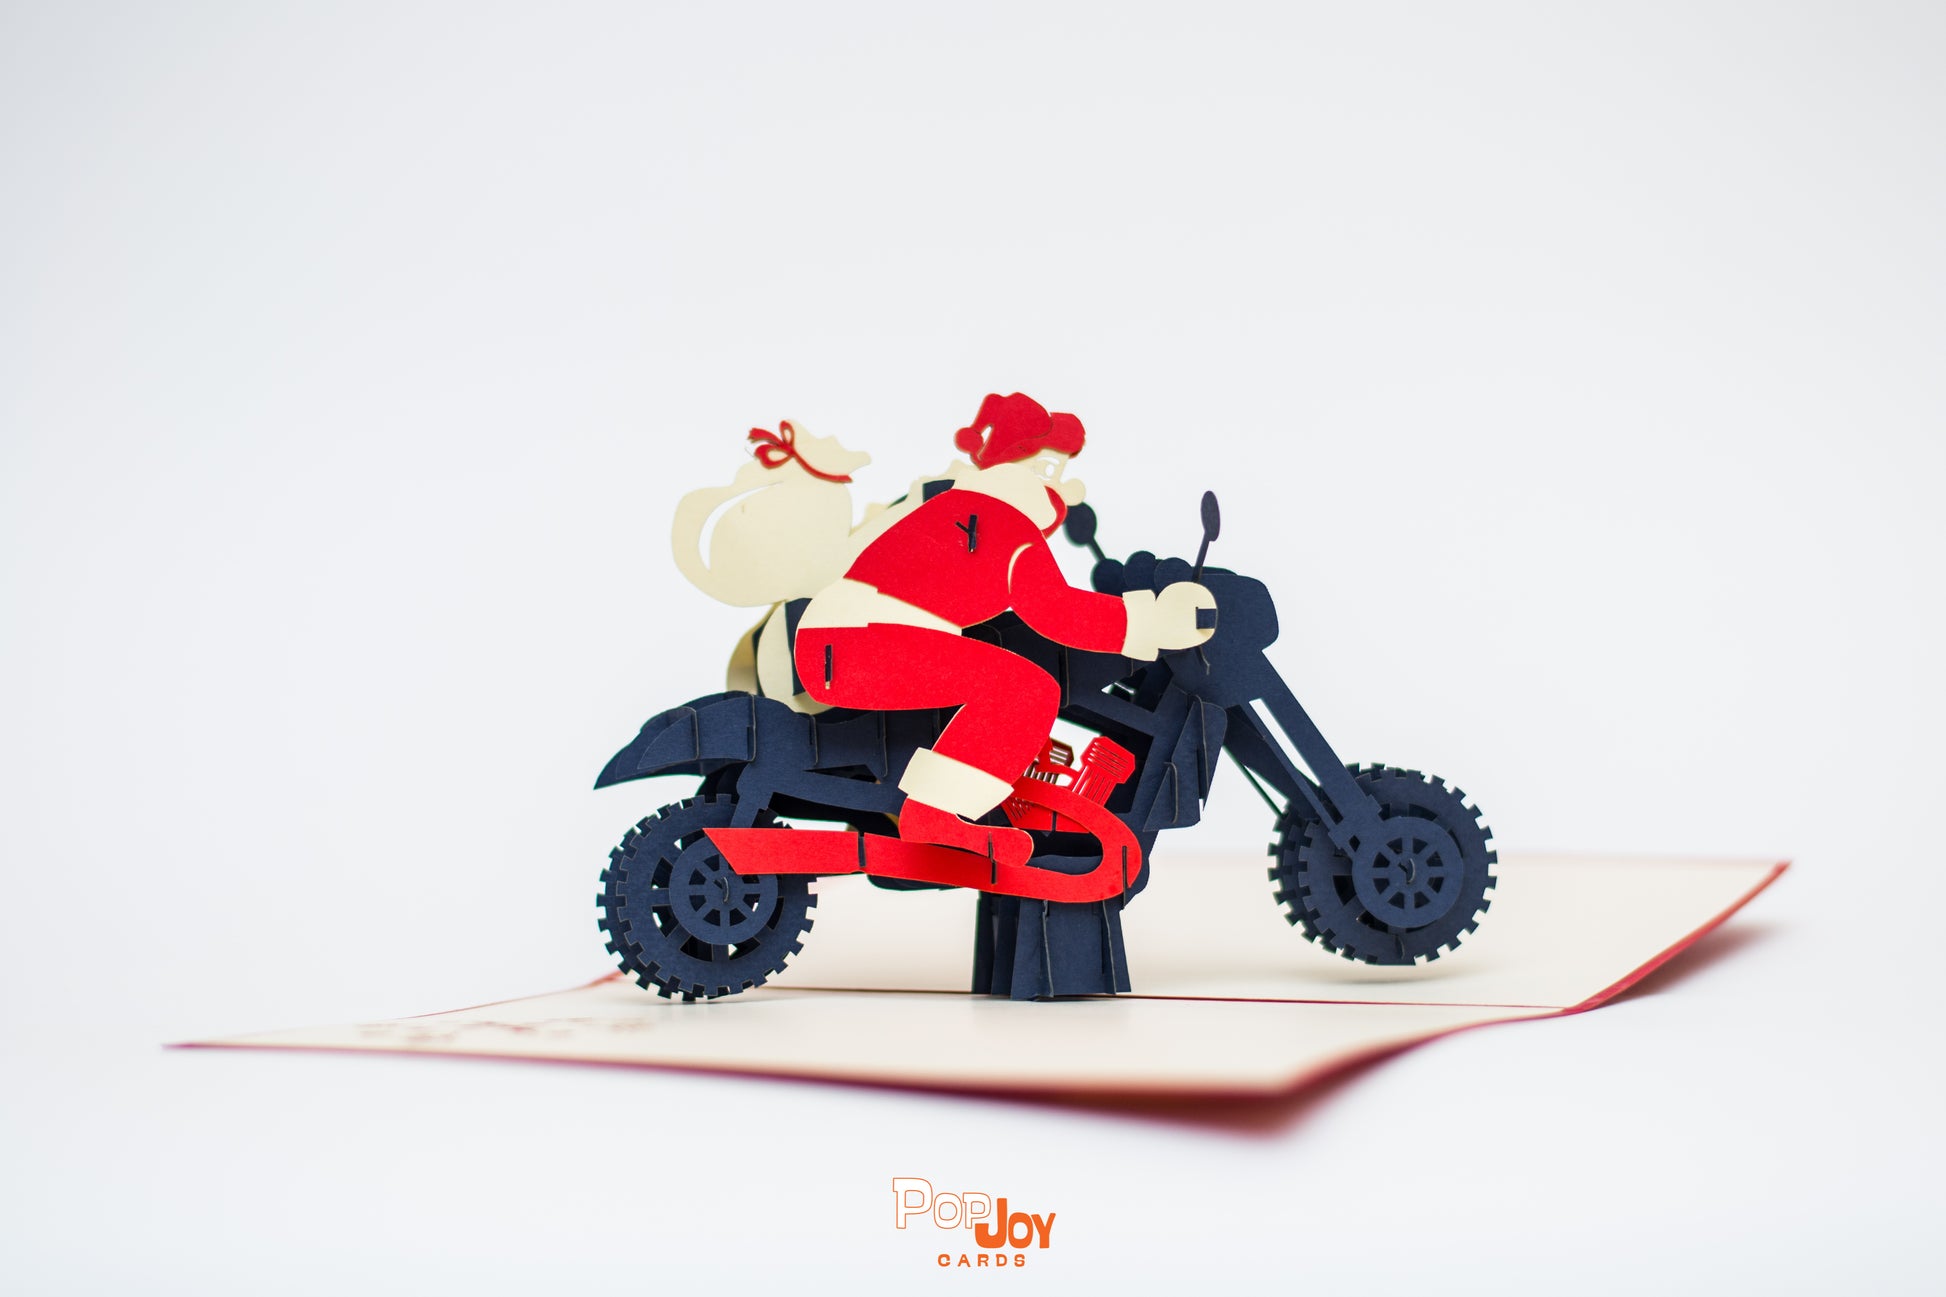 Pop-up card showing Santa riding his motorcycle, with a sack of toys on this back